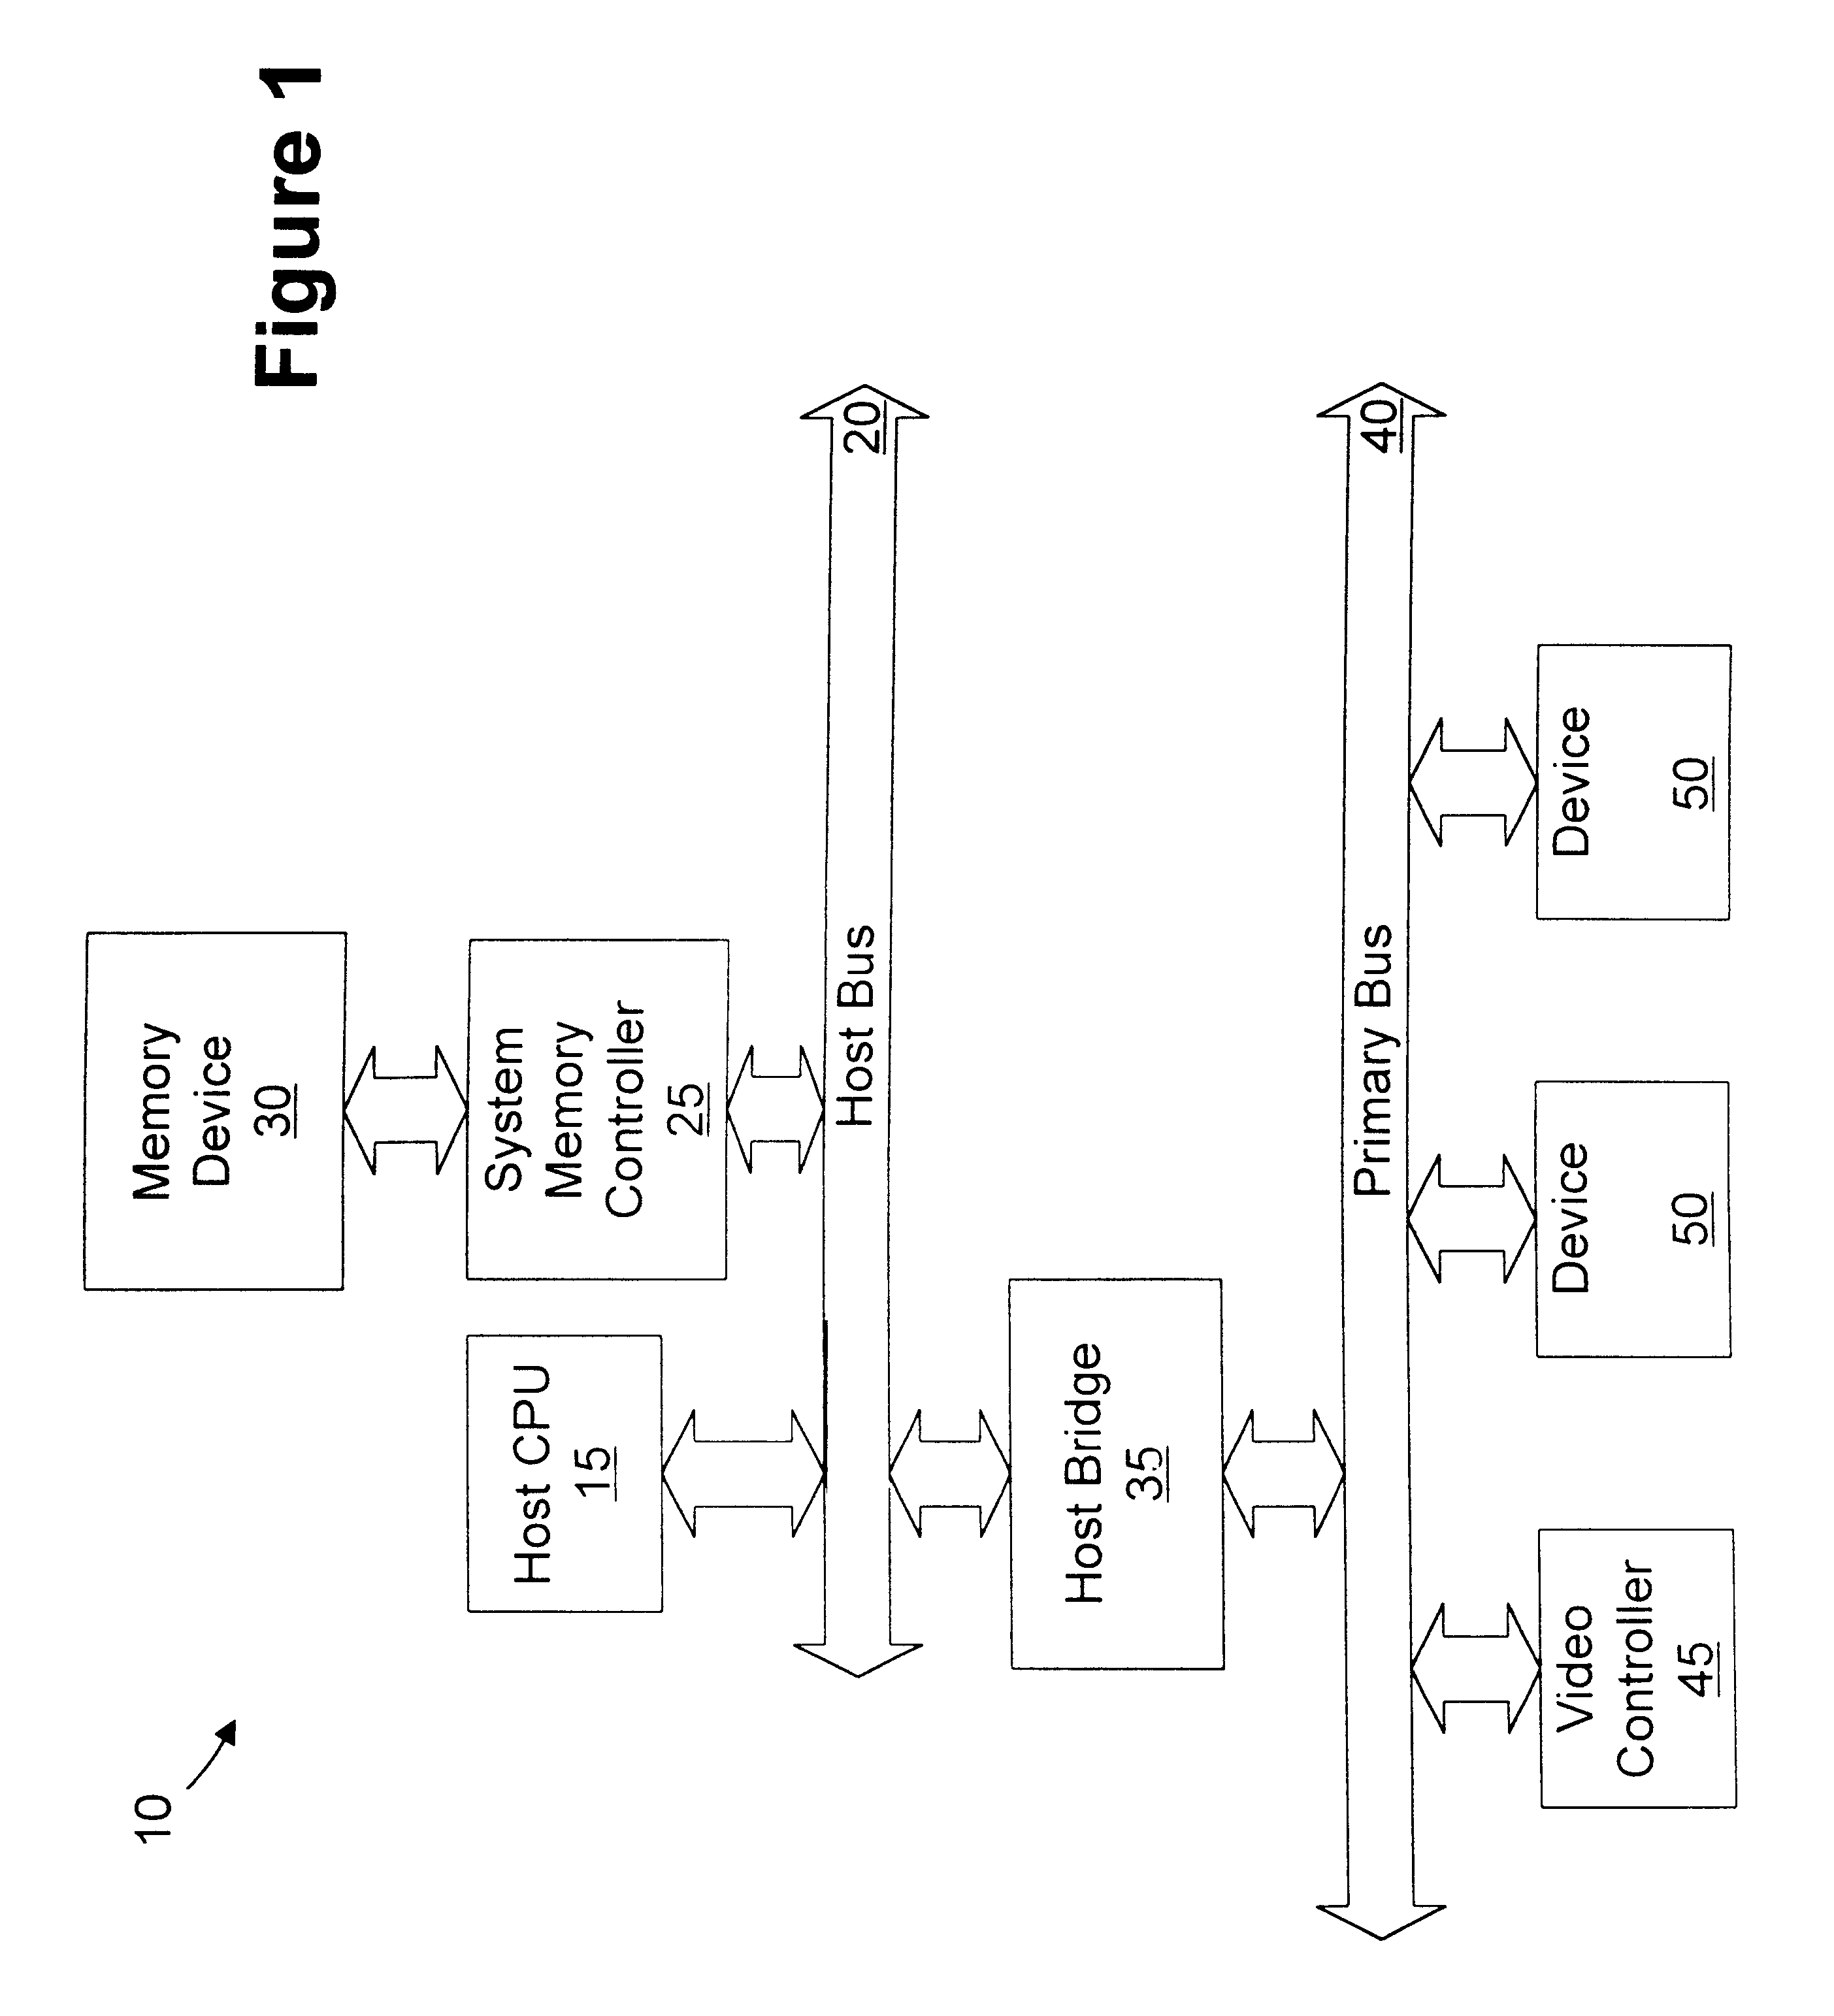 Memory device with synchronized output path